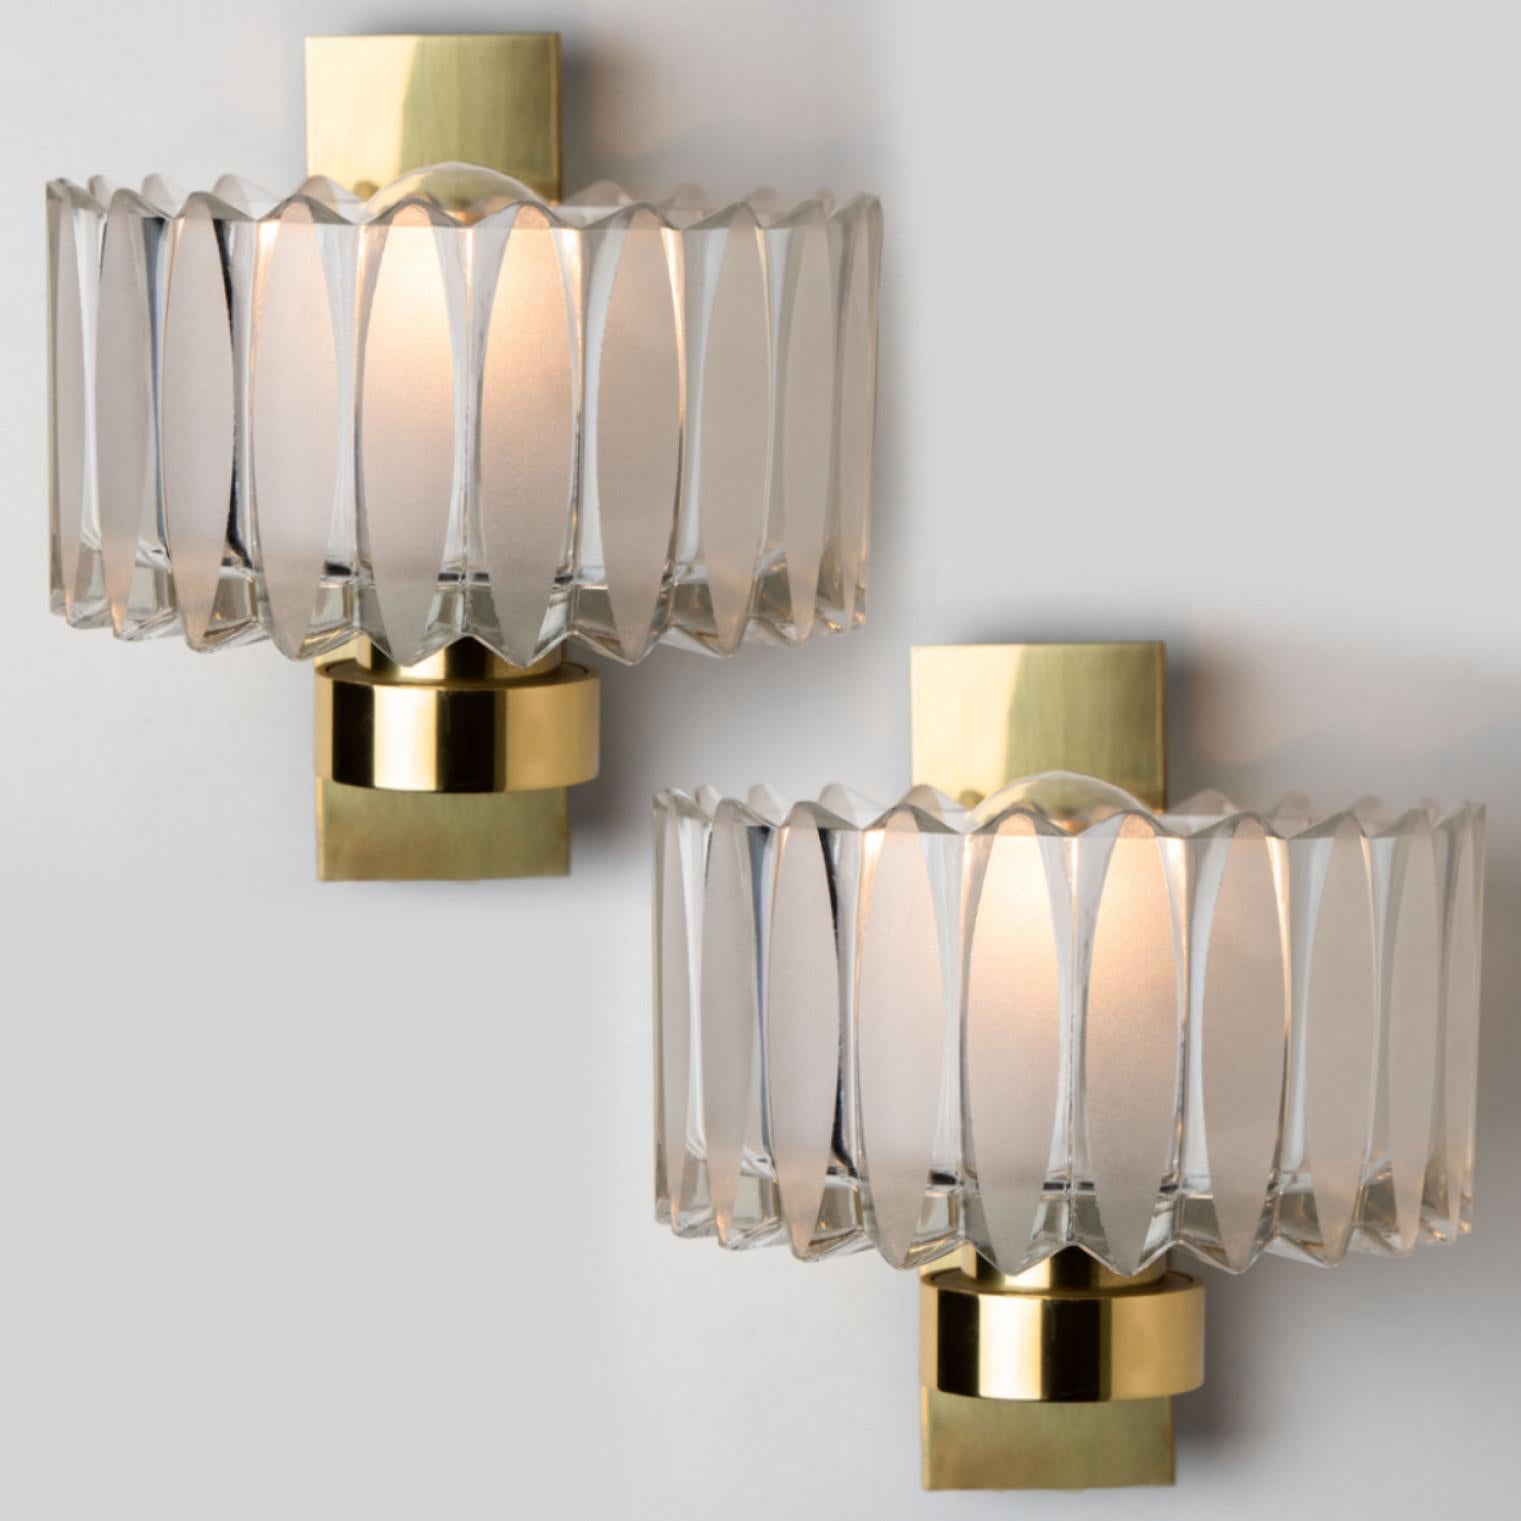 1 of the 2 Sets Hillebrand Brass and Glass Wall Light Fixtures, 1970s For Sale 4